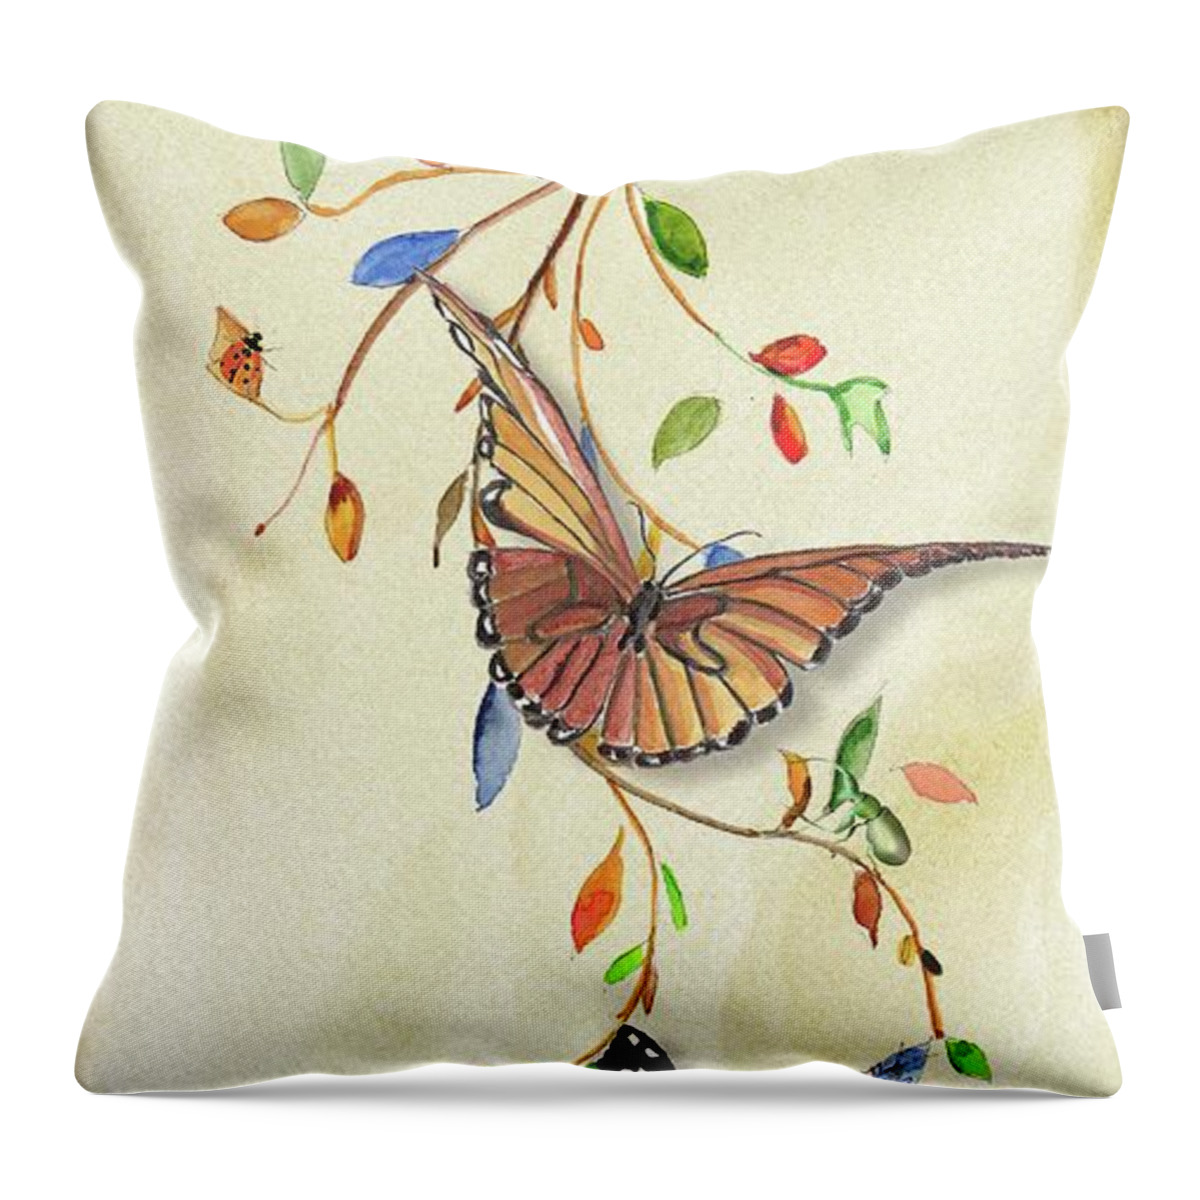 Butterflies Throw Pillow featuring the painting Butterflies Three Companion by Anne Beverley-Stamps